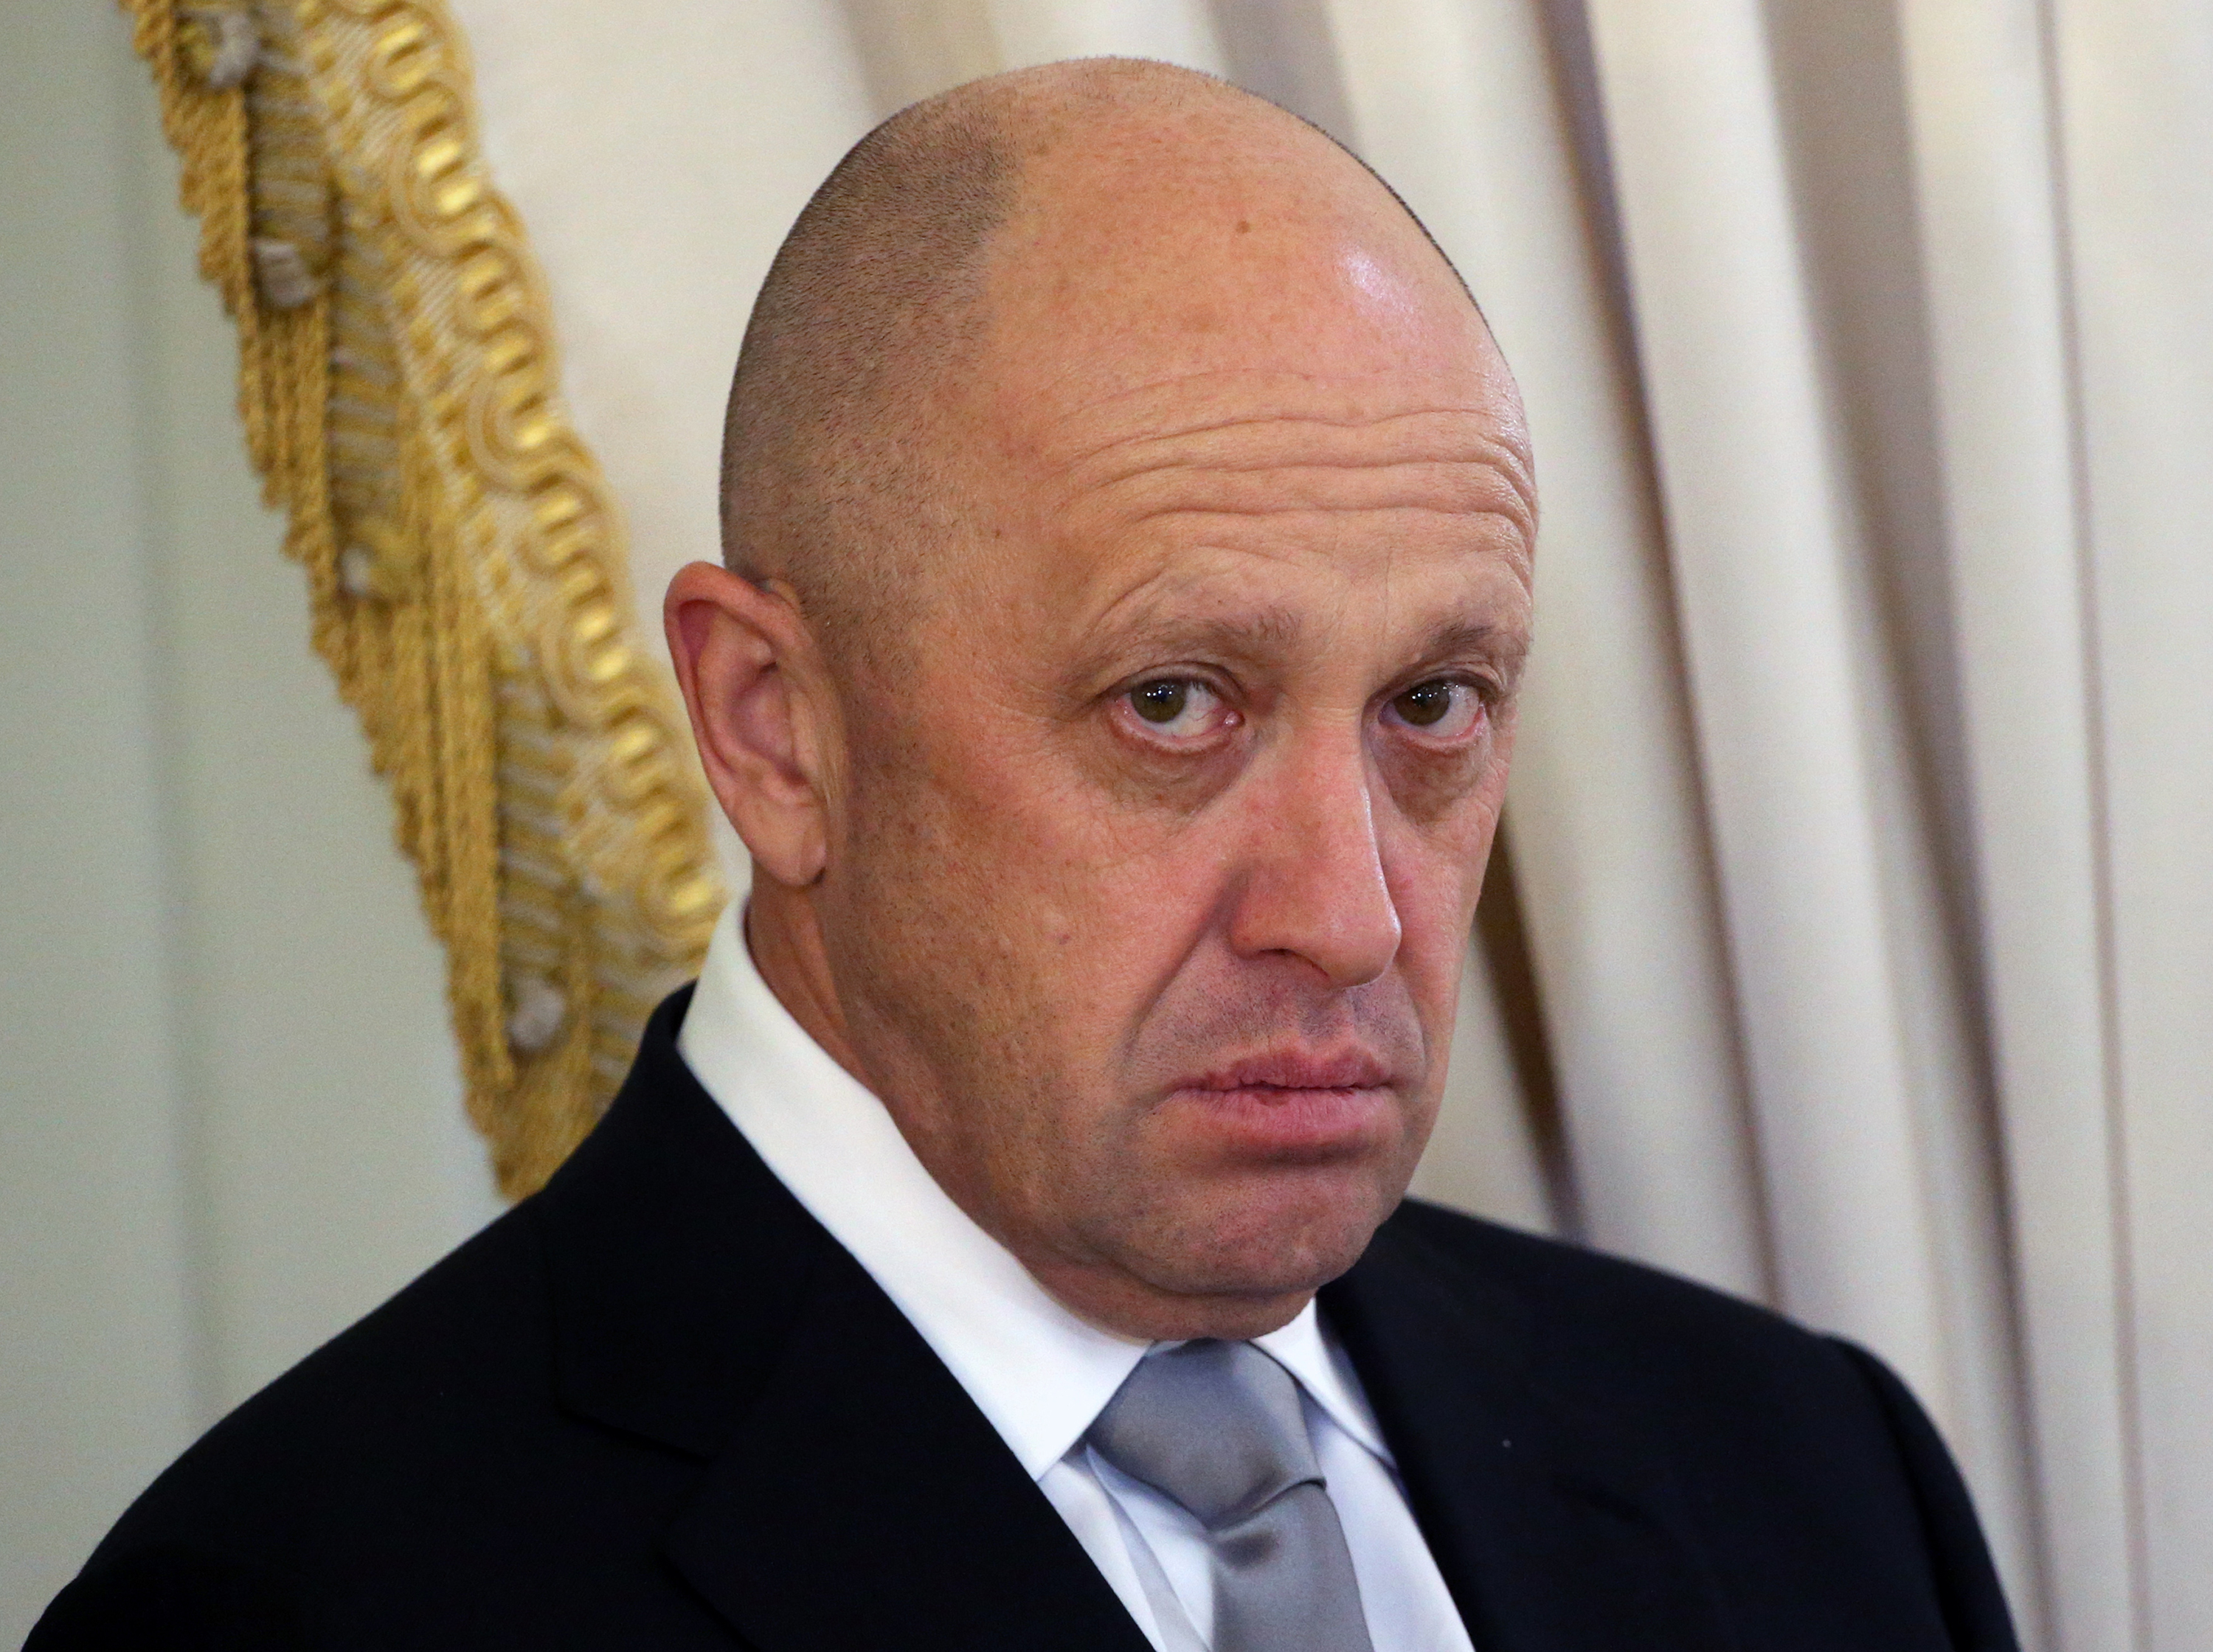 Wagner boss Yevgeny Prigozhin attends a meeting in St. Petersburg, Russia on June 16, 2016. 